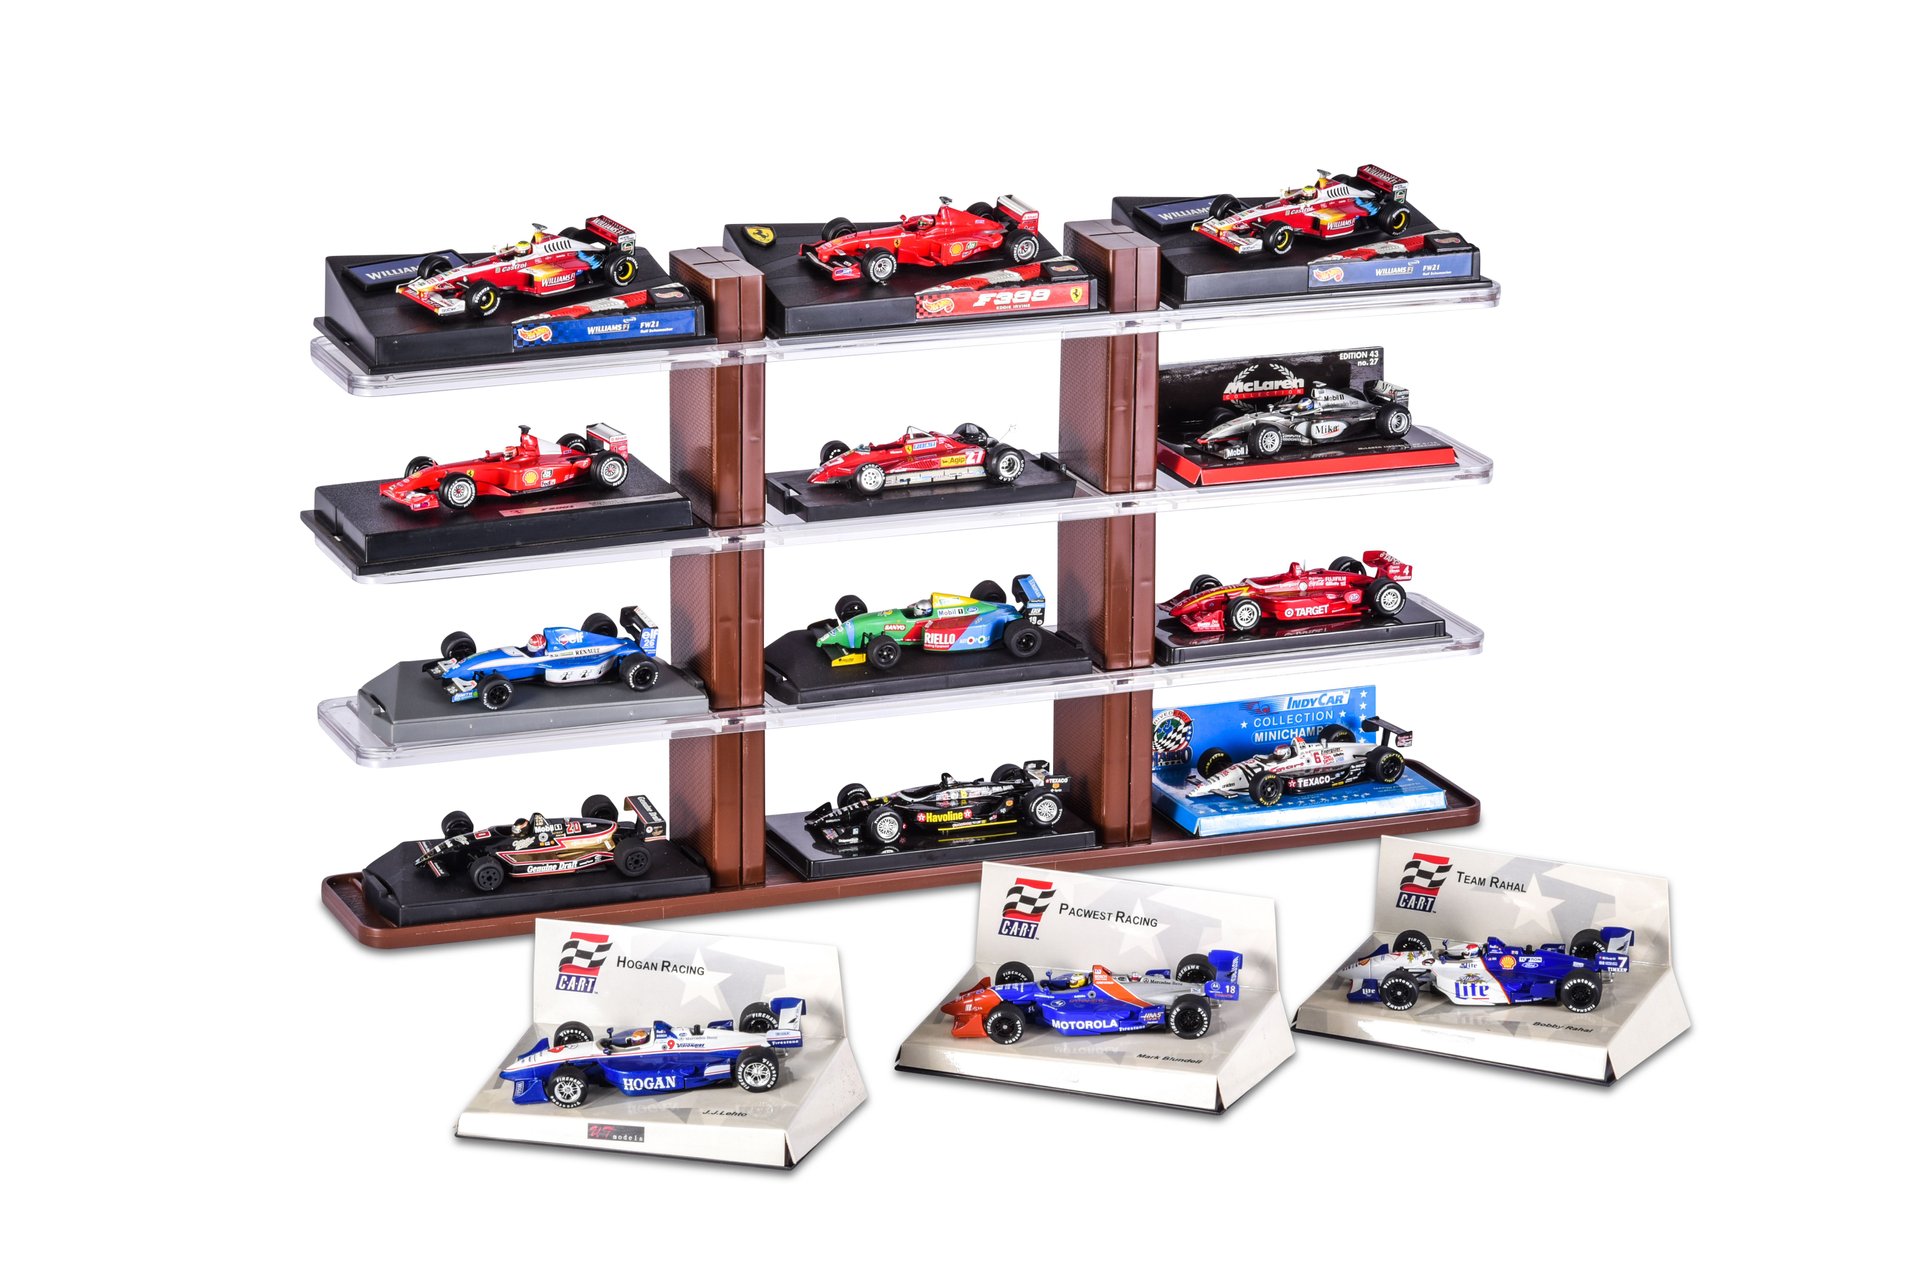 For Sale Group of Formula 1 and Indy Race Cars